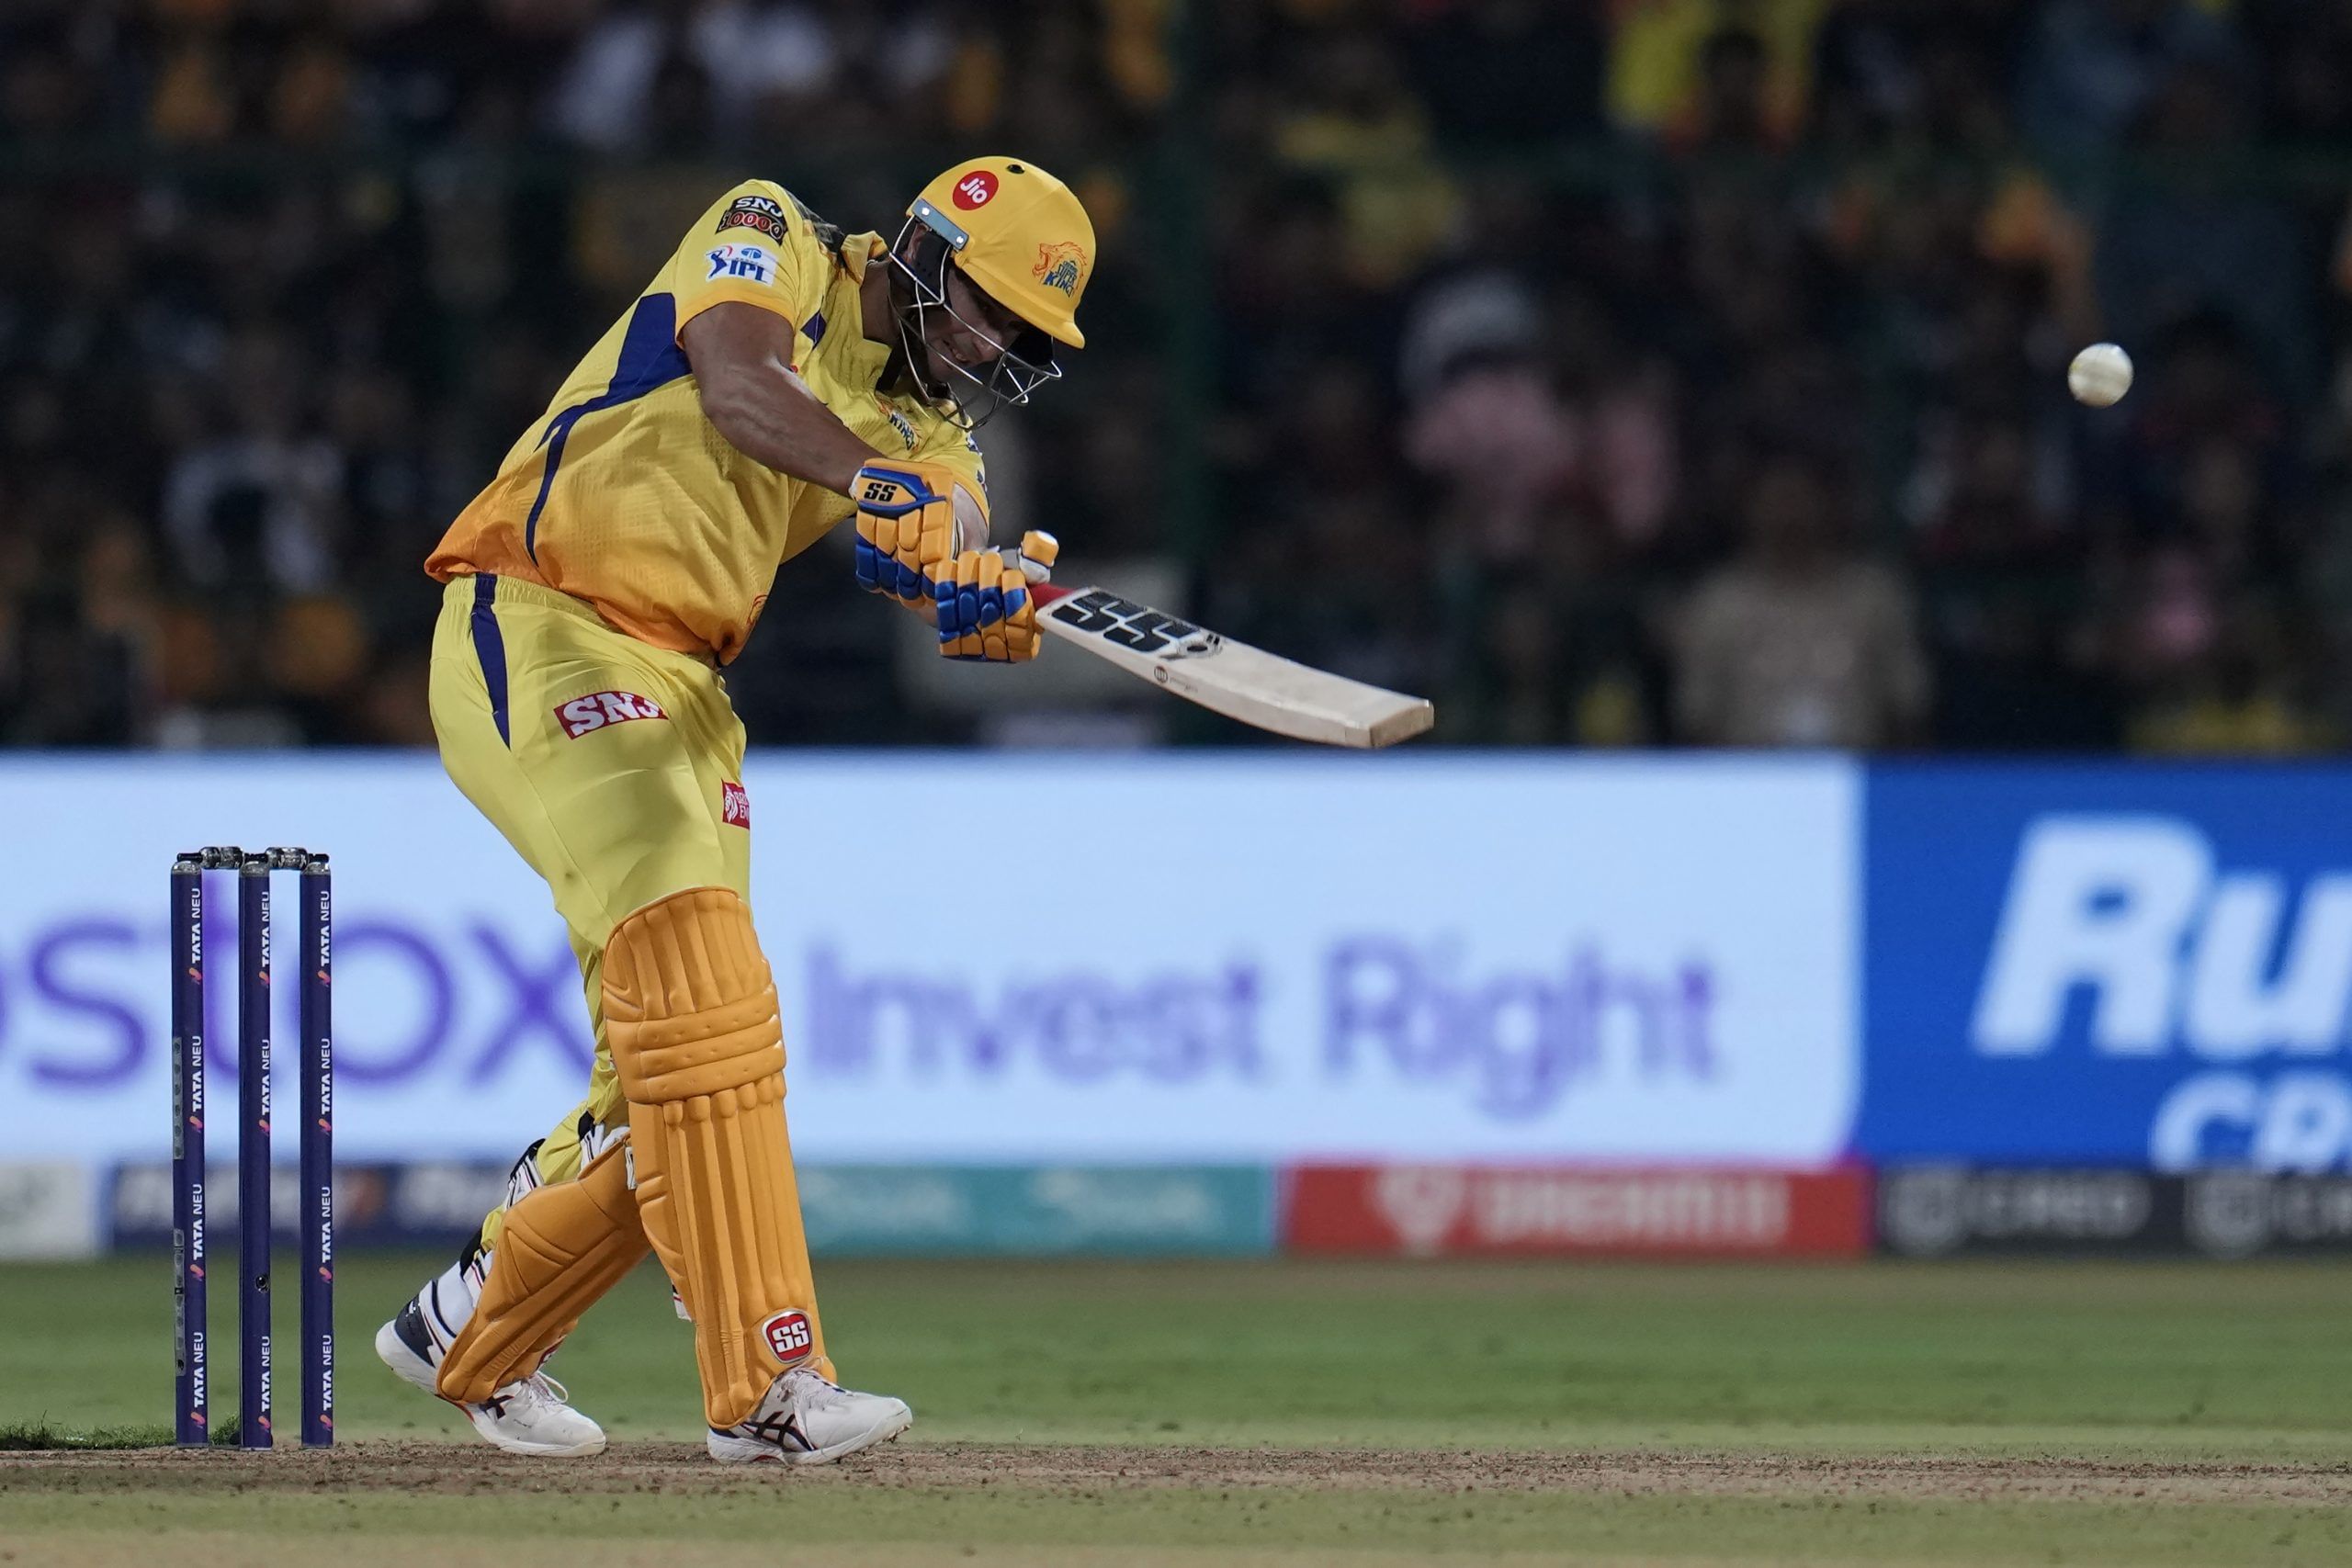 CSK vs RCB Turning Point: CSK maverick Shivam Dube and his five sixes rob RCB of a home win at Chinnaswamy